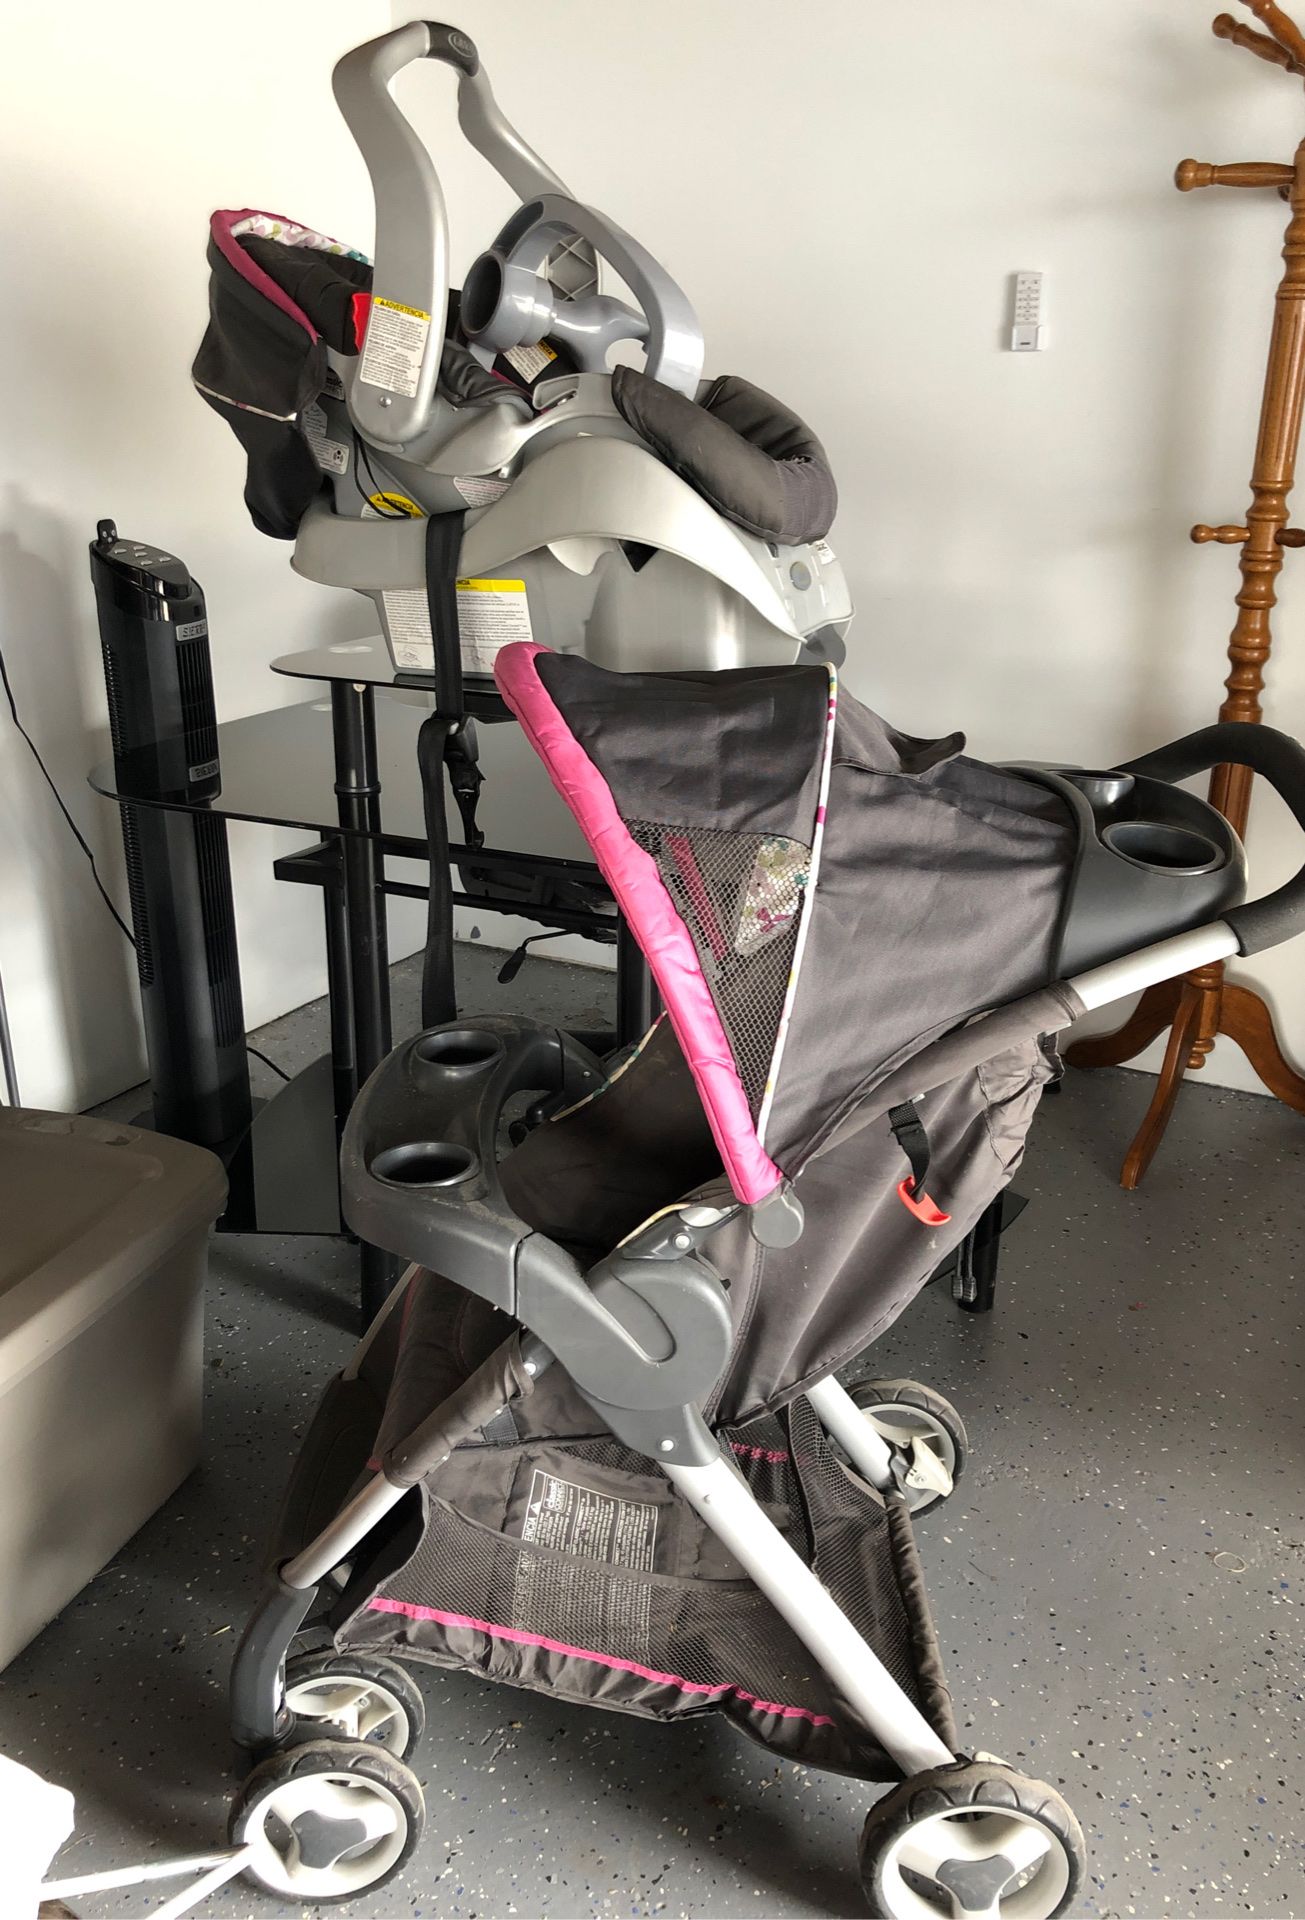 Stroller and Car Seat Set